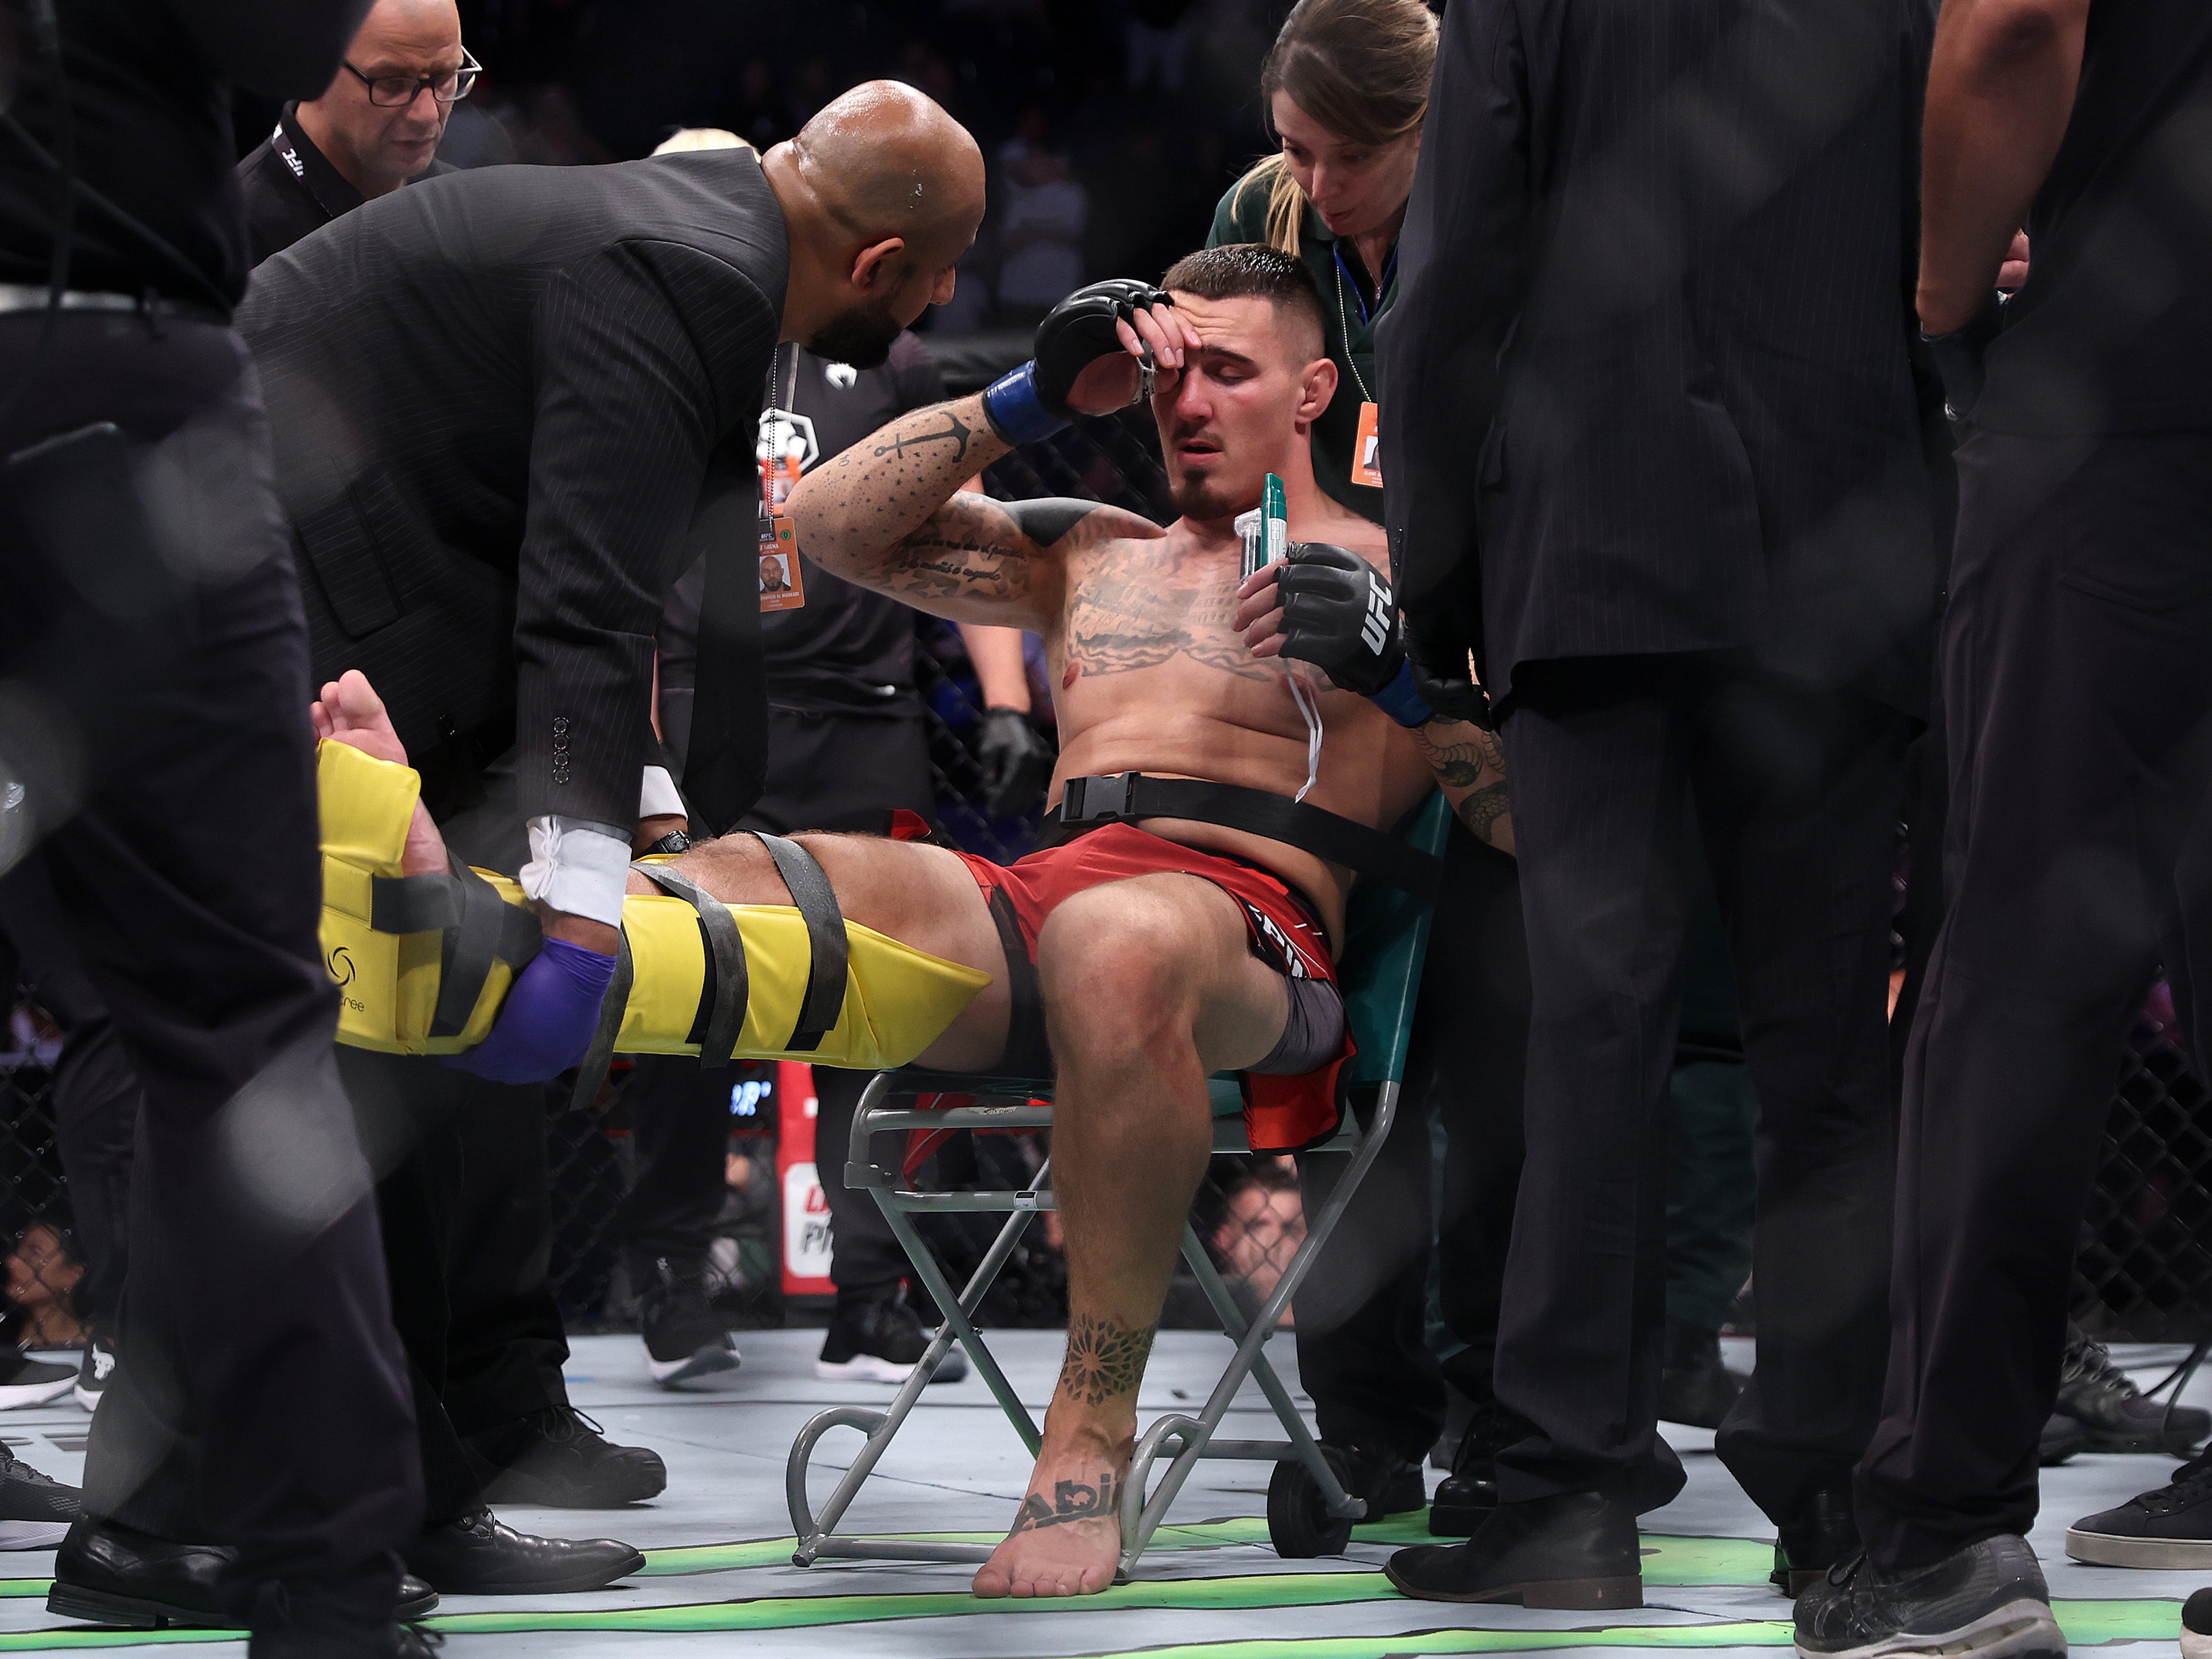 Tom Aspinall injured his knee just 15 seconds into the main event